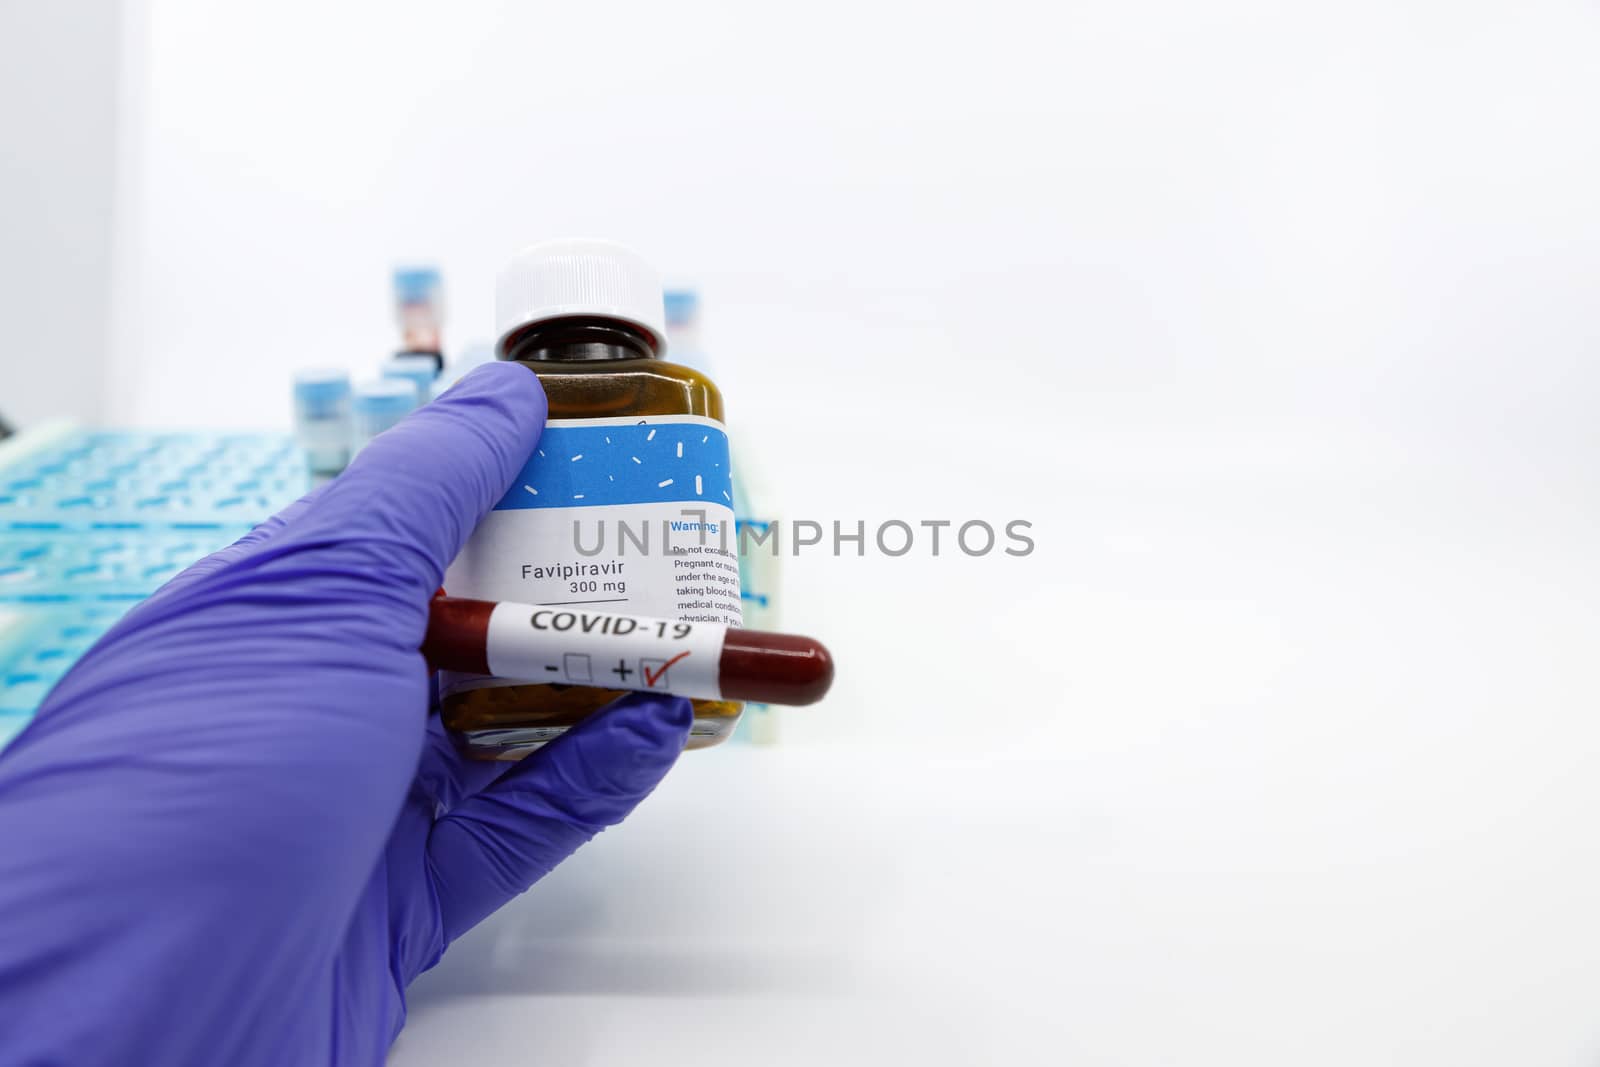 Dubai-UAE-Circa 2020:Doctor showing bottle of medicine with positive covid-19 test.Concept of Favipiravir medicine with blood tests tubes on the background.Cure for coronavirus,COVID-19 treatment.